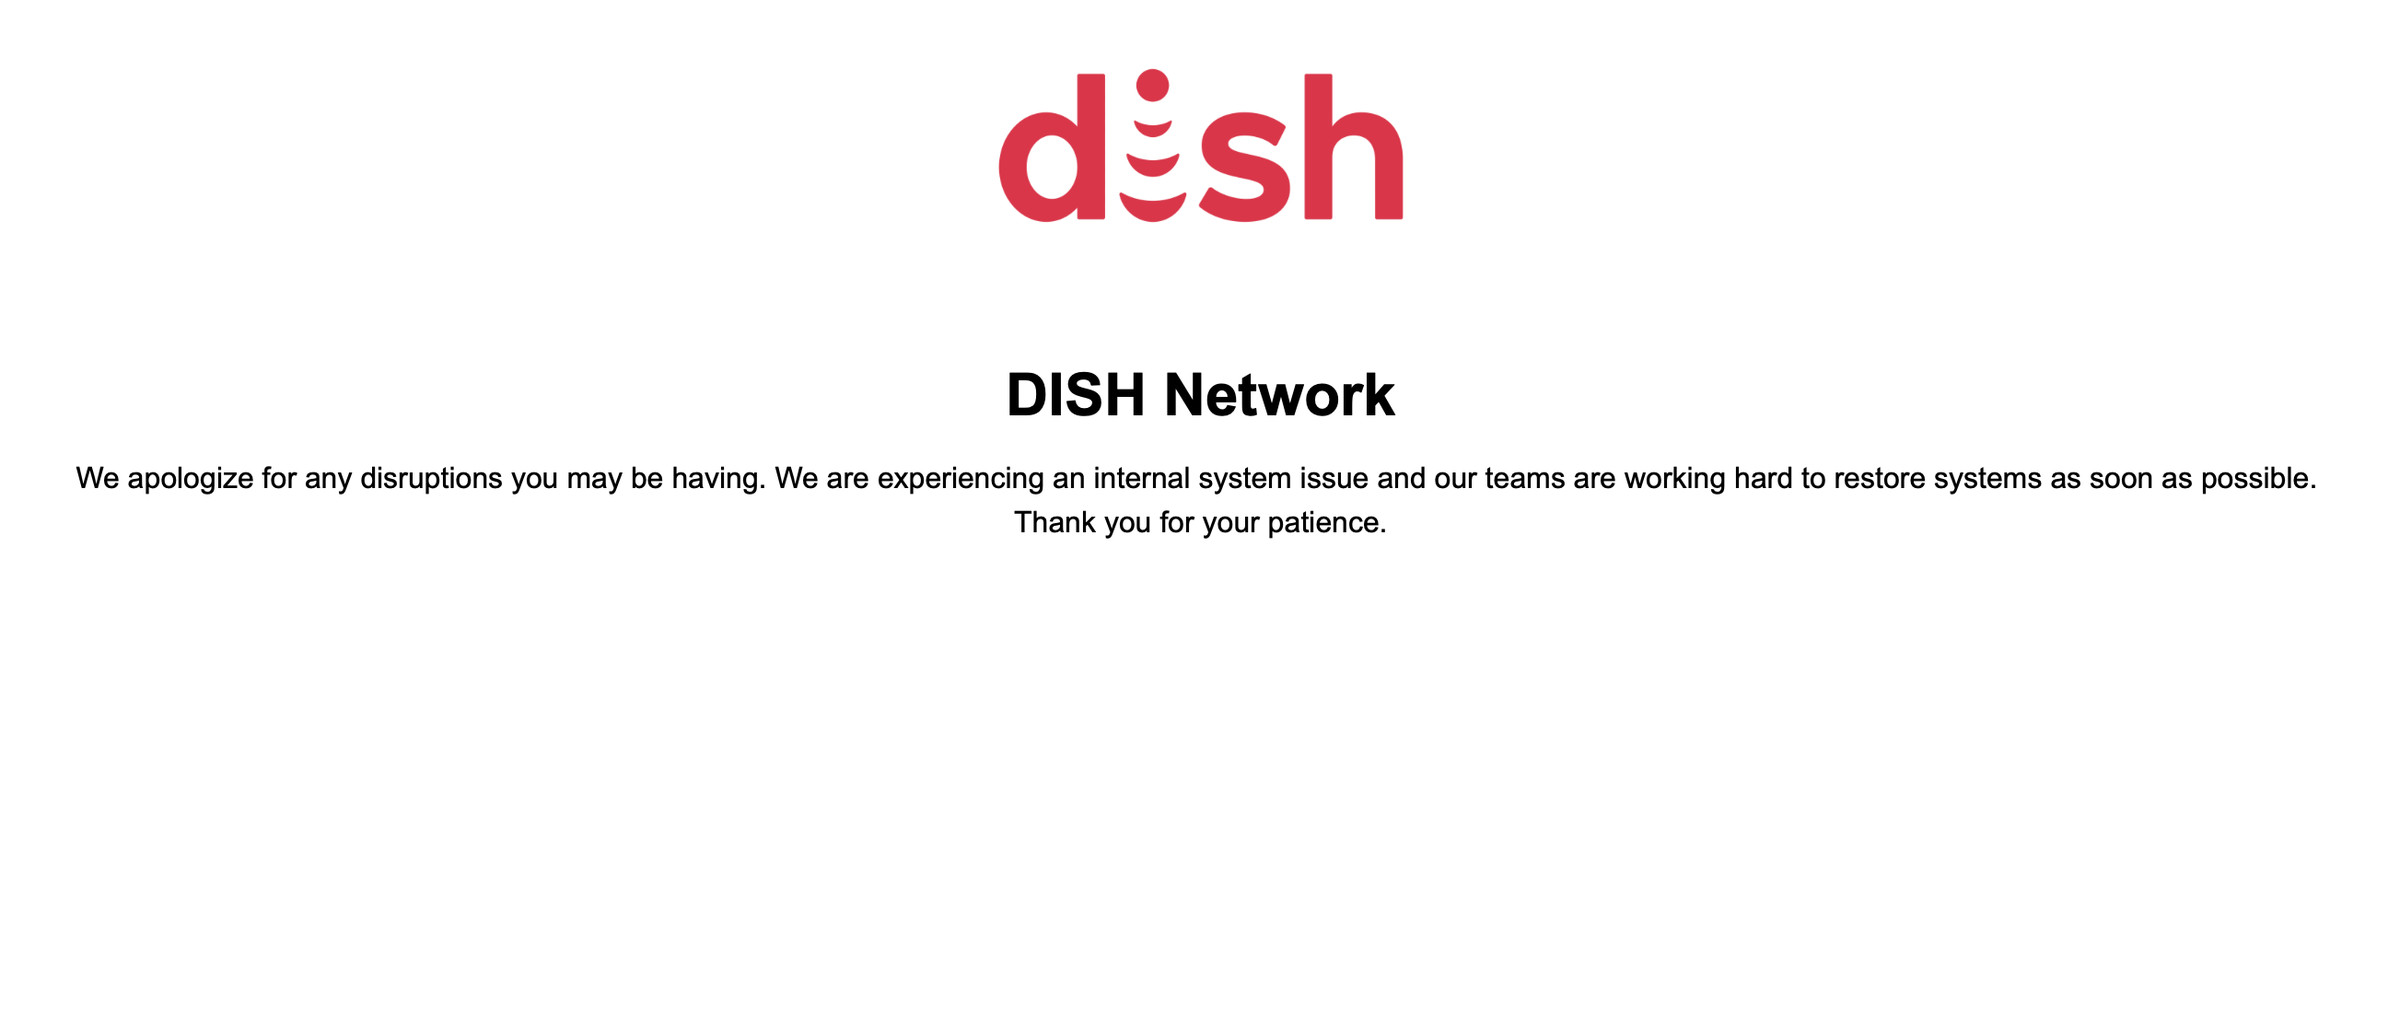 Screenshot of Dish's website with the text: “We apologize for any inconvenience this may cause you.  We are experiencing an internal system issue and our teams are working hard to restore systems as soon as possible.  Thank you for your patience.”